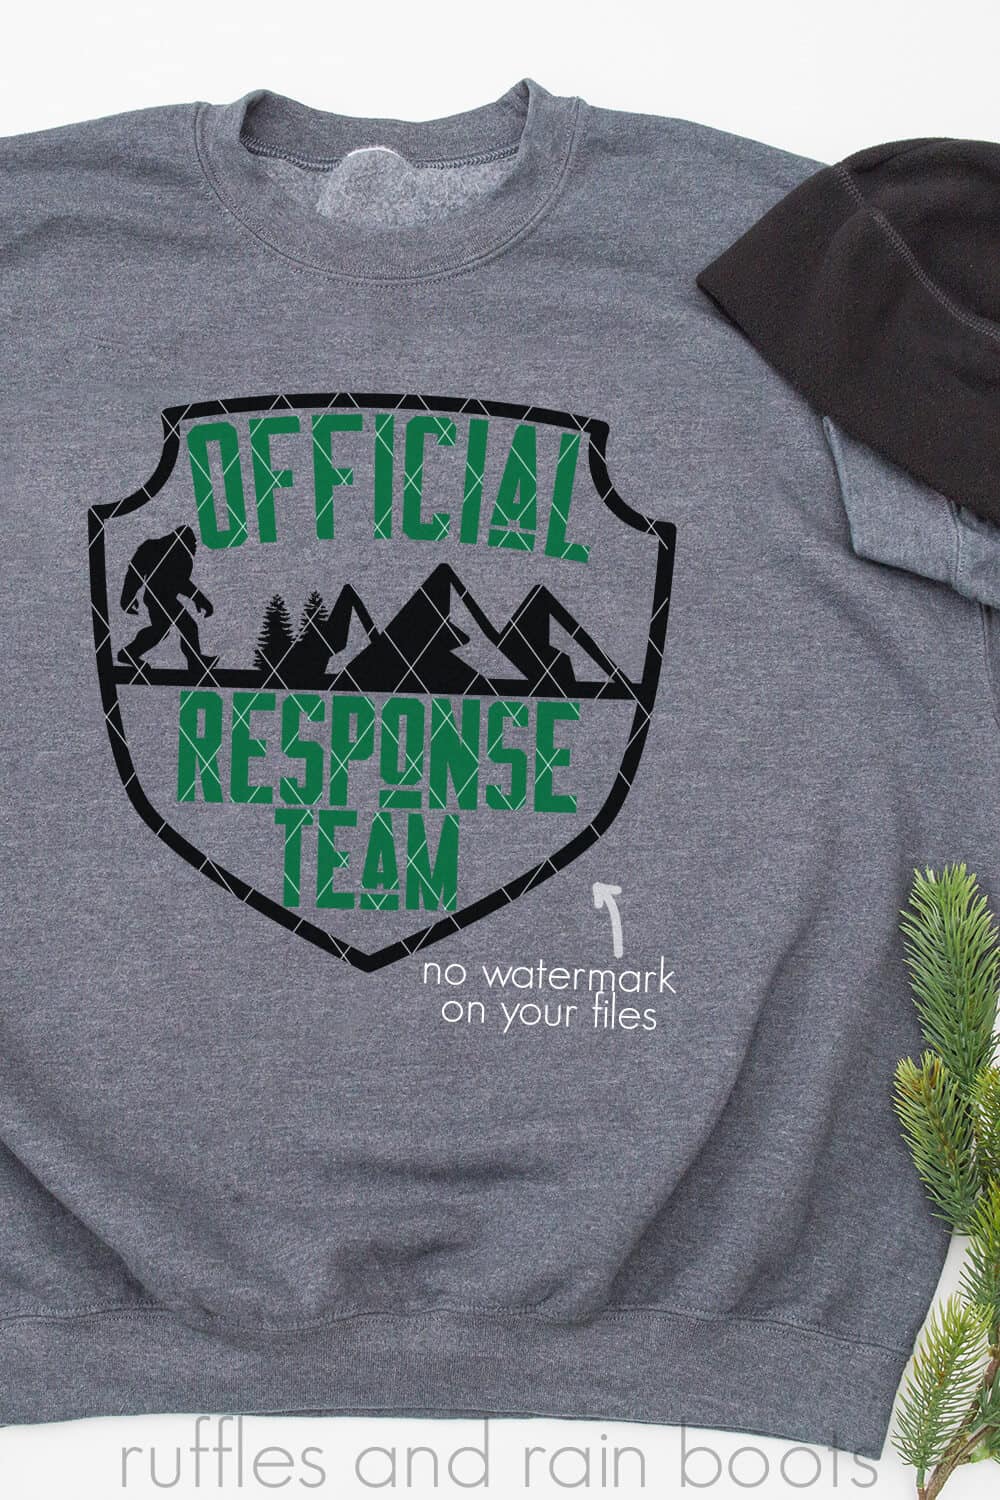 Vertical image of a gray sweatshirt with badge design which reads official response team with sasquatch bigfoot and mountains.